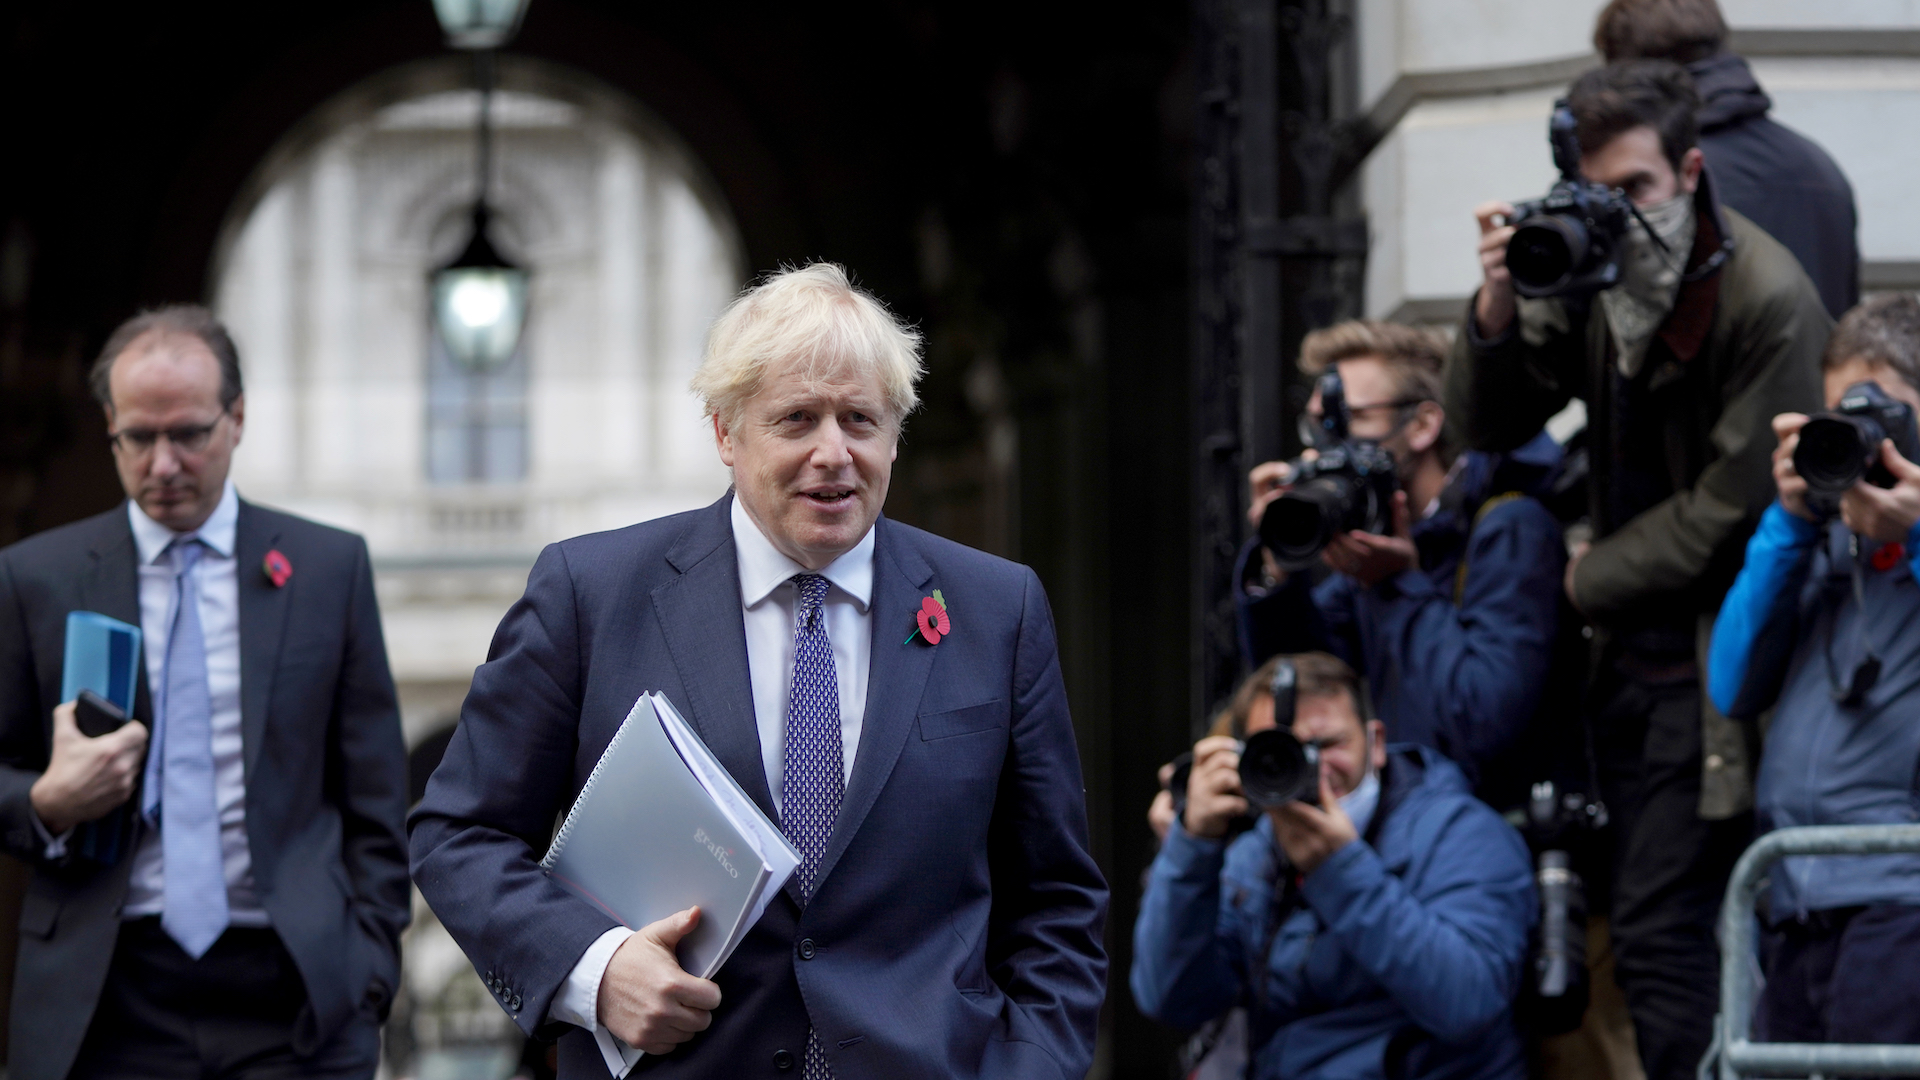 Prime Minister Boris Johnson walks through Whitehall with papers under his arm